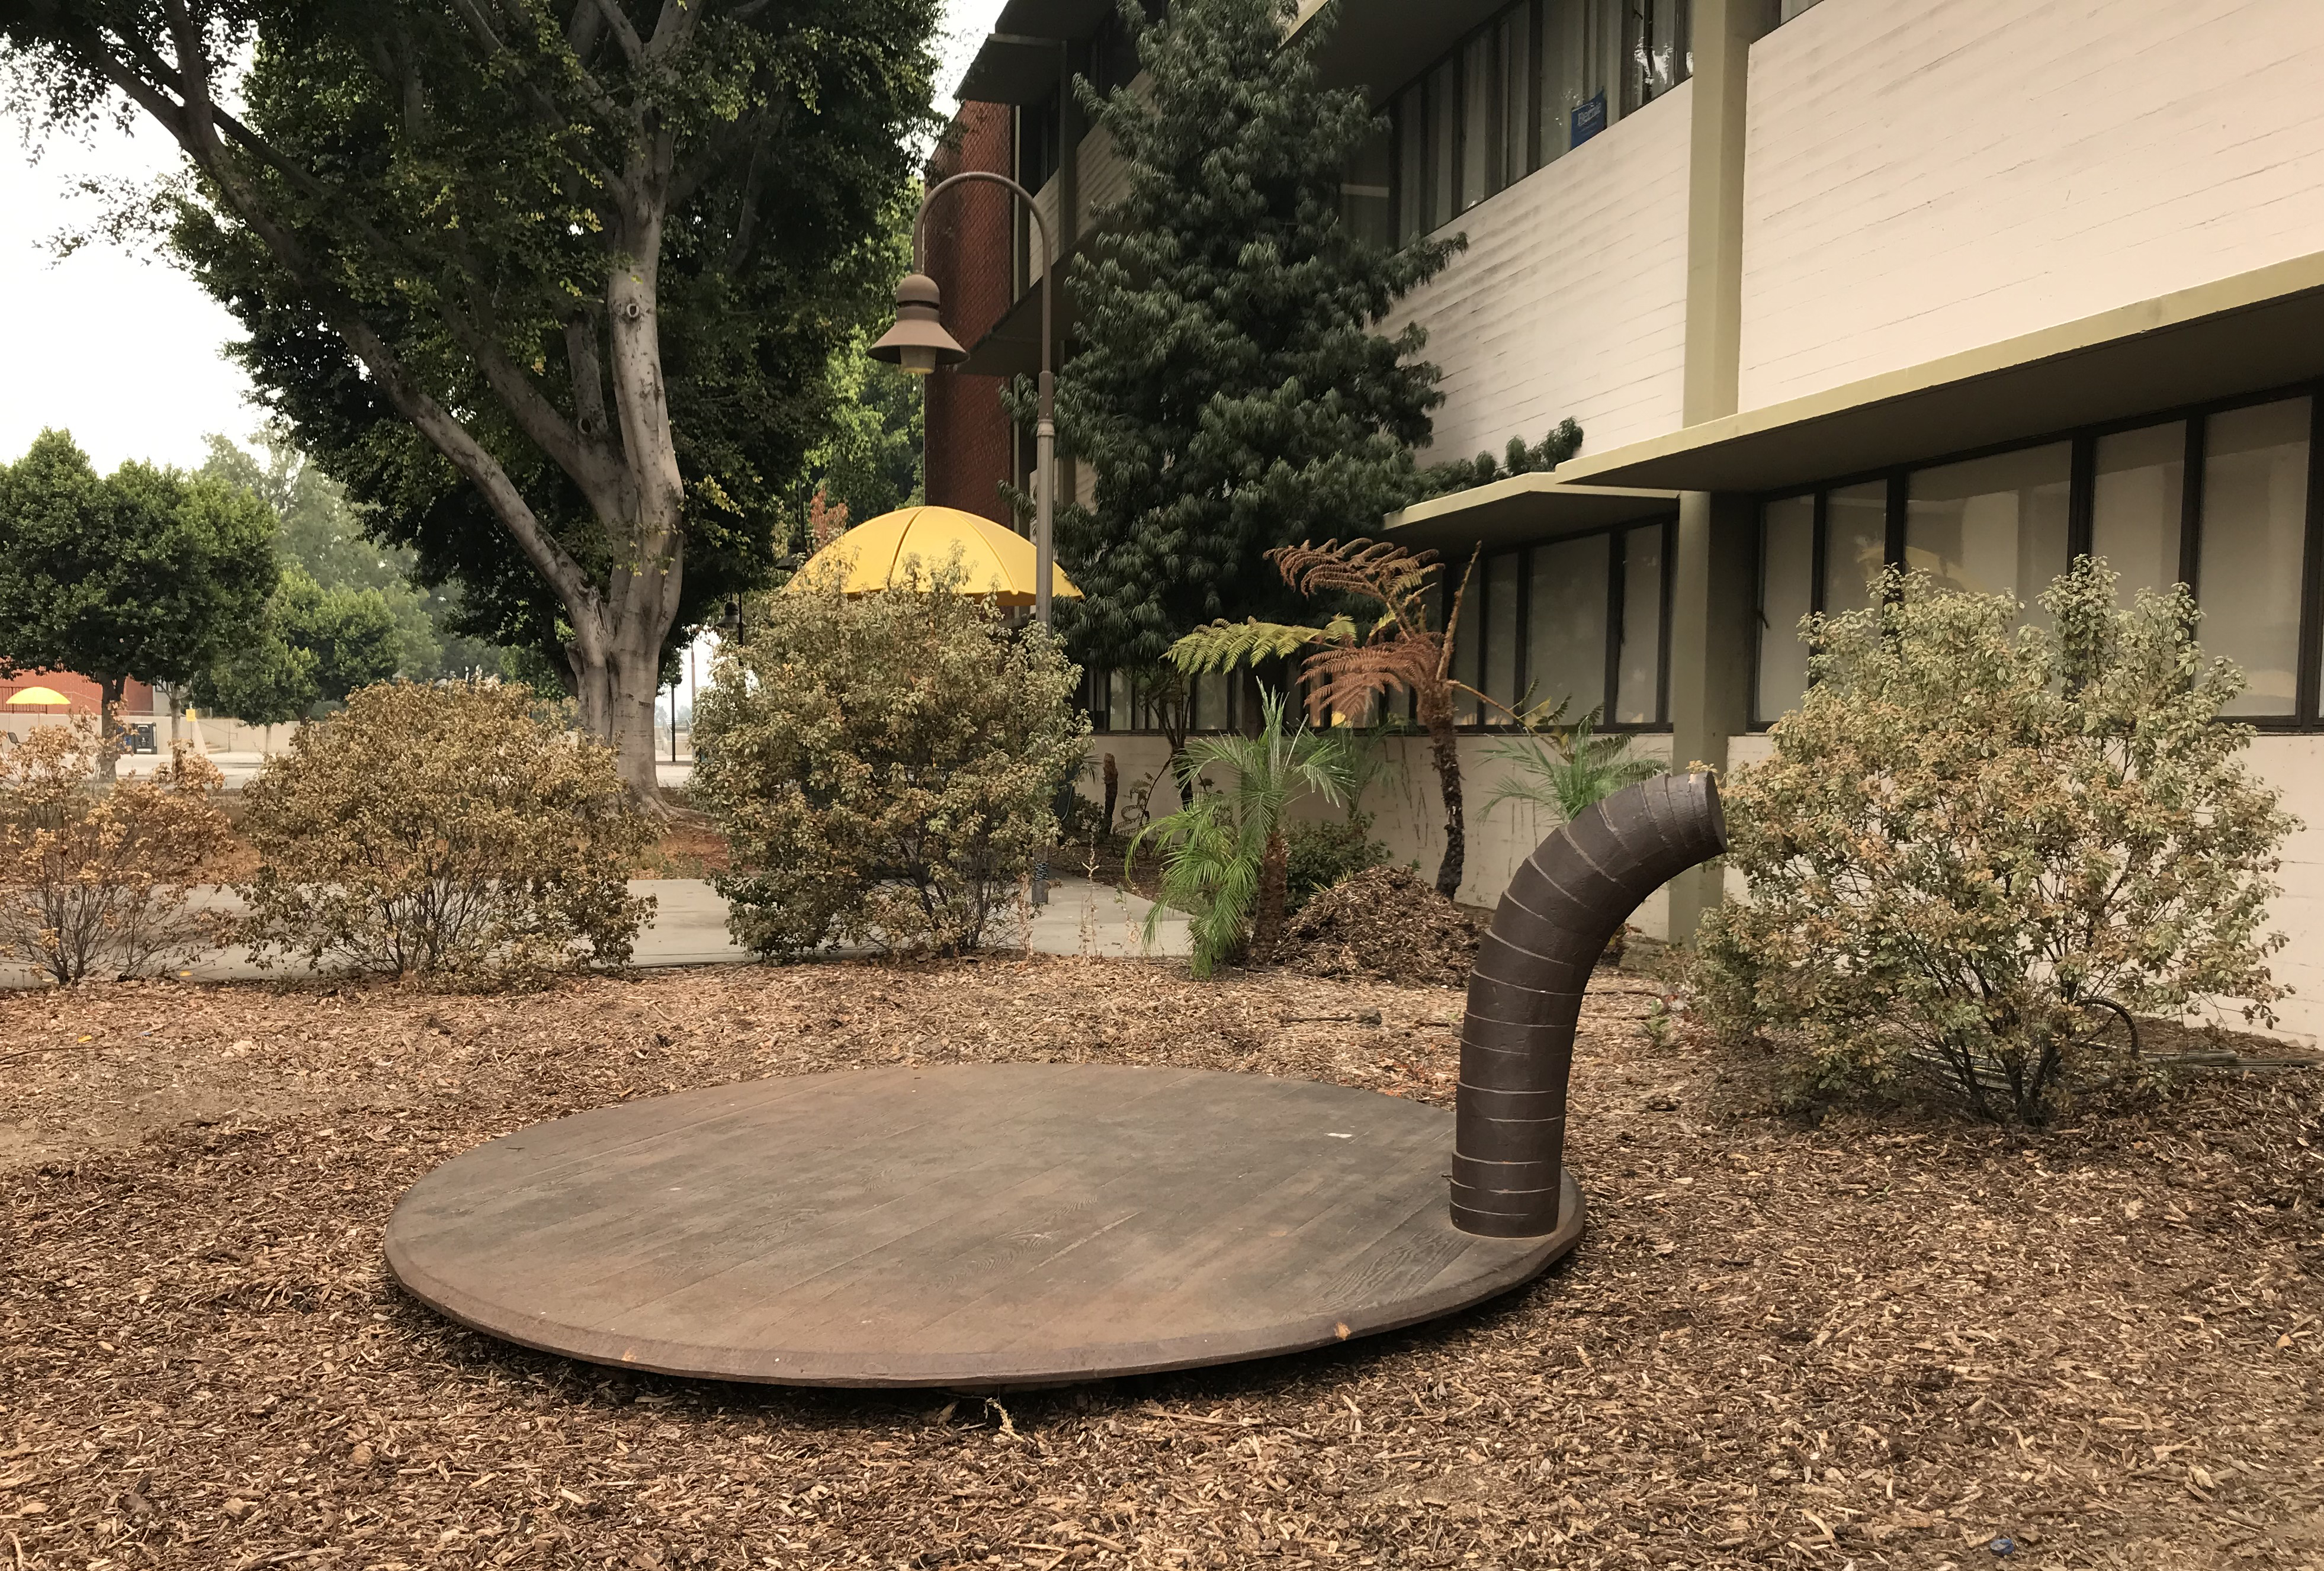 Installation photograph, featuring Martin Puryear’s Decoy, 1990, at California State University, Los Angeles, September 2020, Los Angeles County Museum of Art, purchased with funds provided by the Art Museum Council and the Flintridge Foundation, 1991, © Martin Puryear